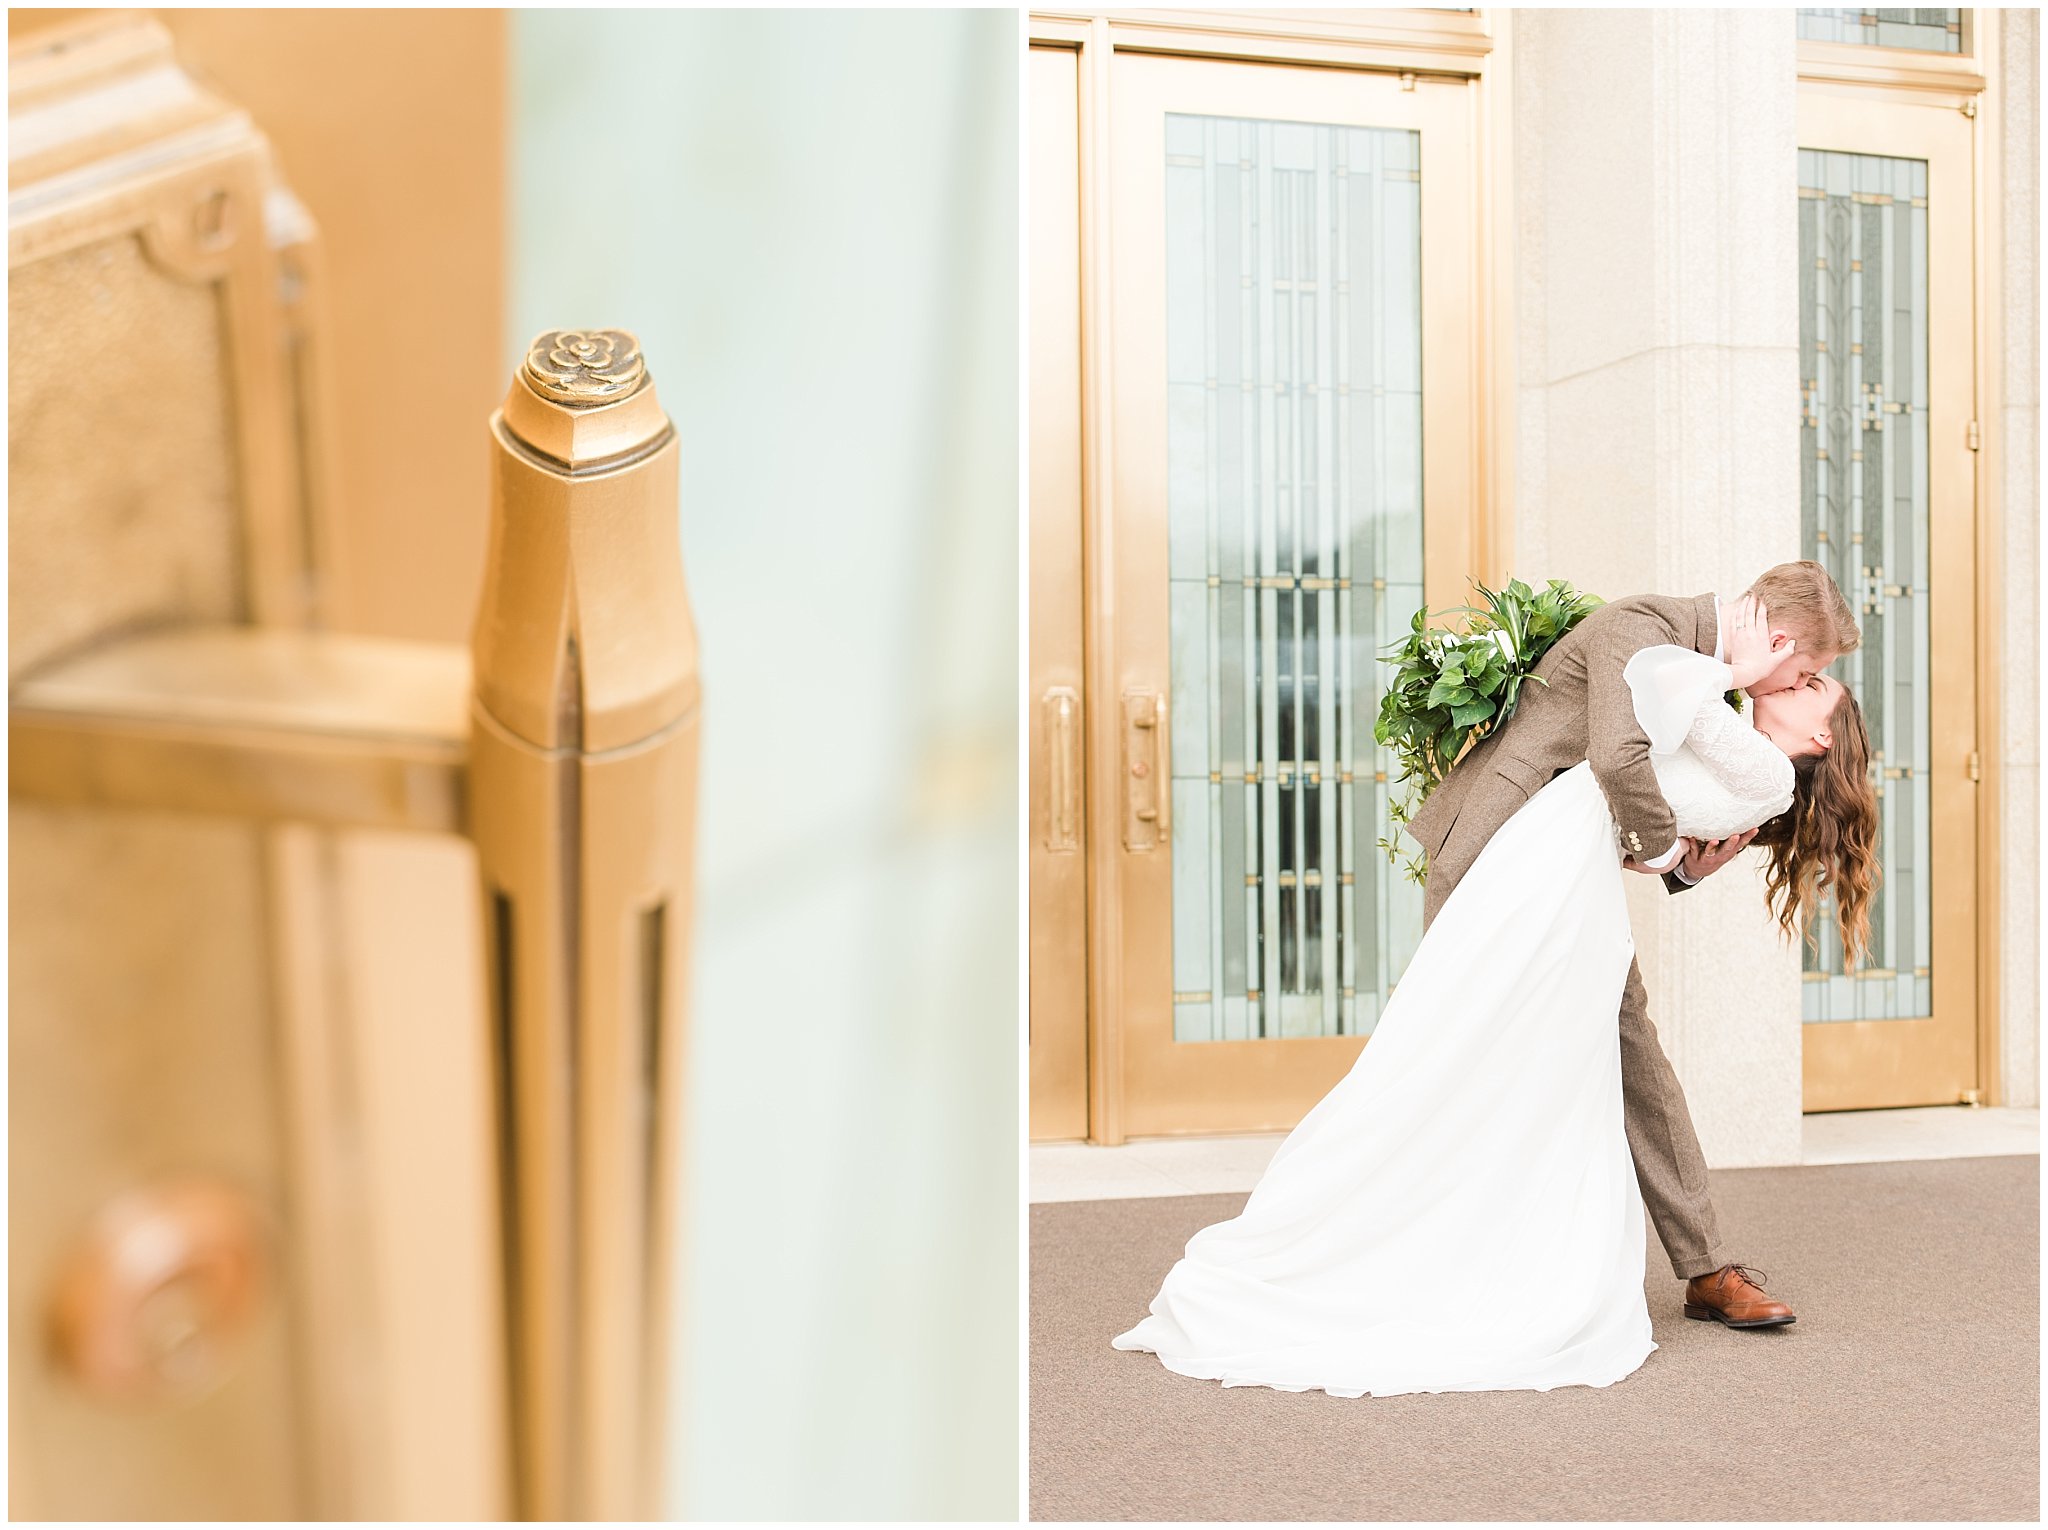 Temple exit during Ogden Temple winter wedding | Brown, Emerald Green, and white wedding | Ogden Temple and Sweet Magnolia Wedding | Jessie and Dallin Photography